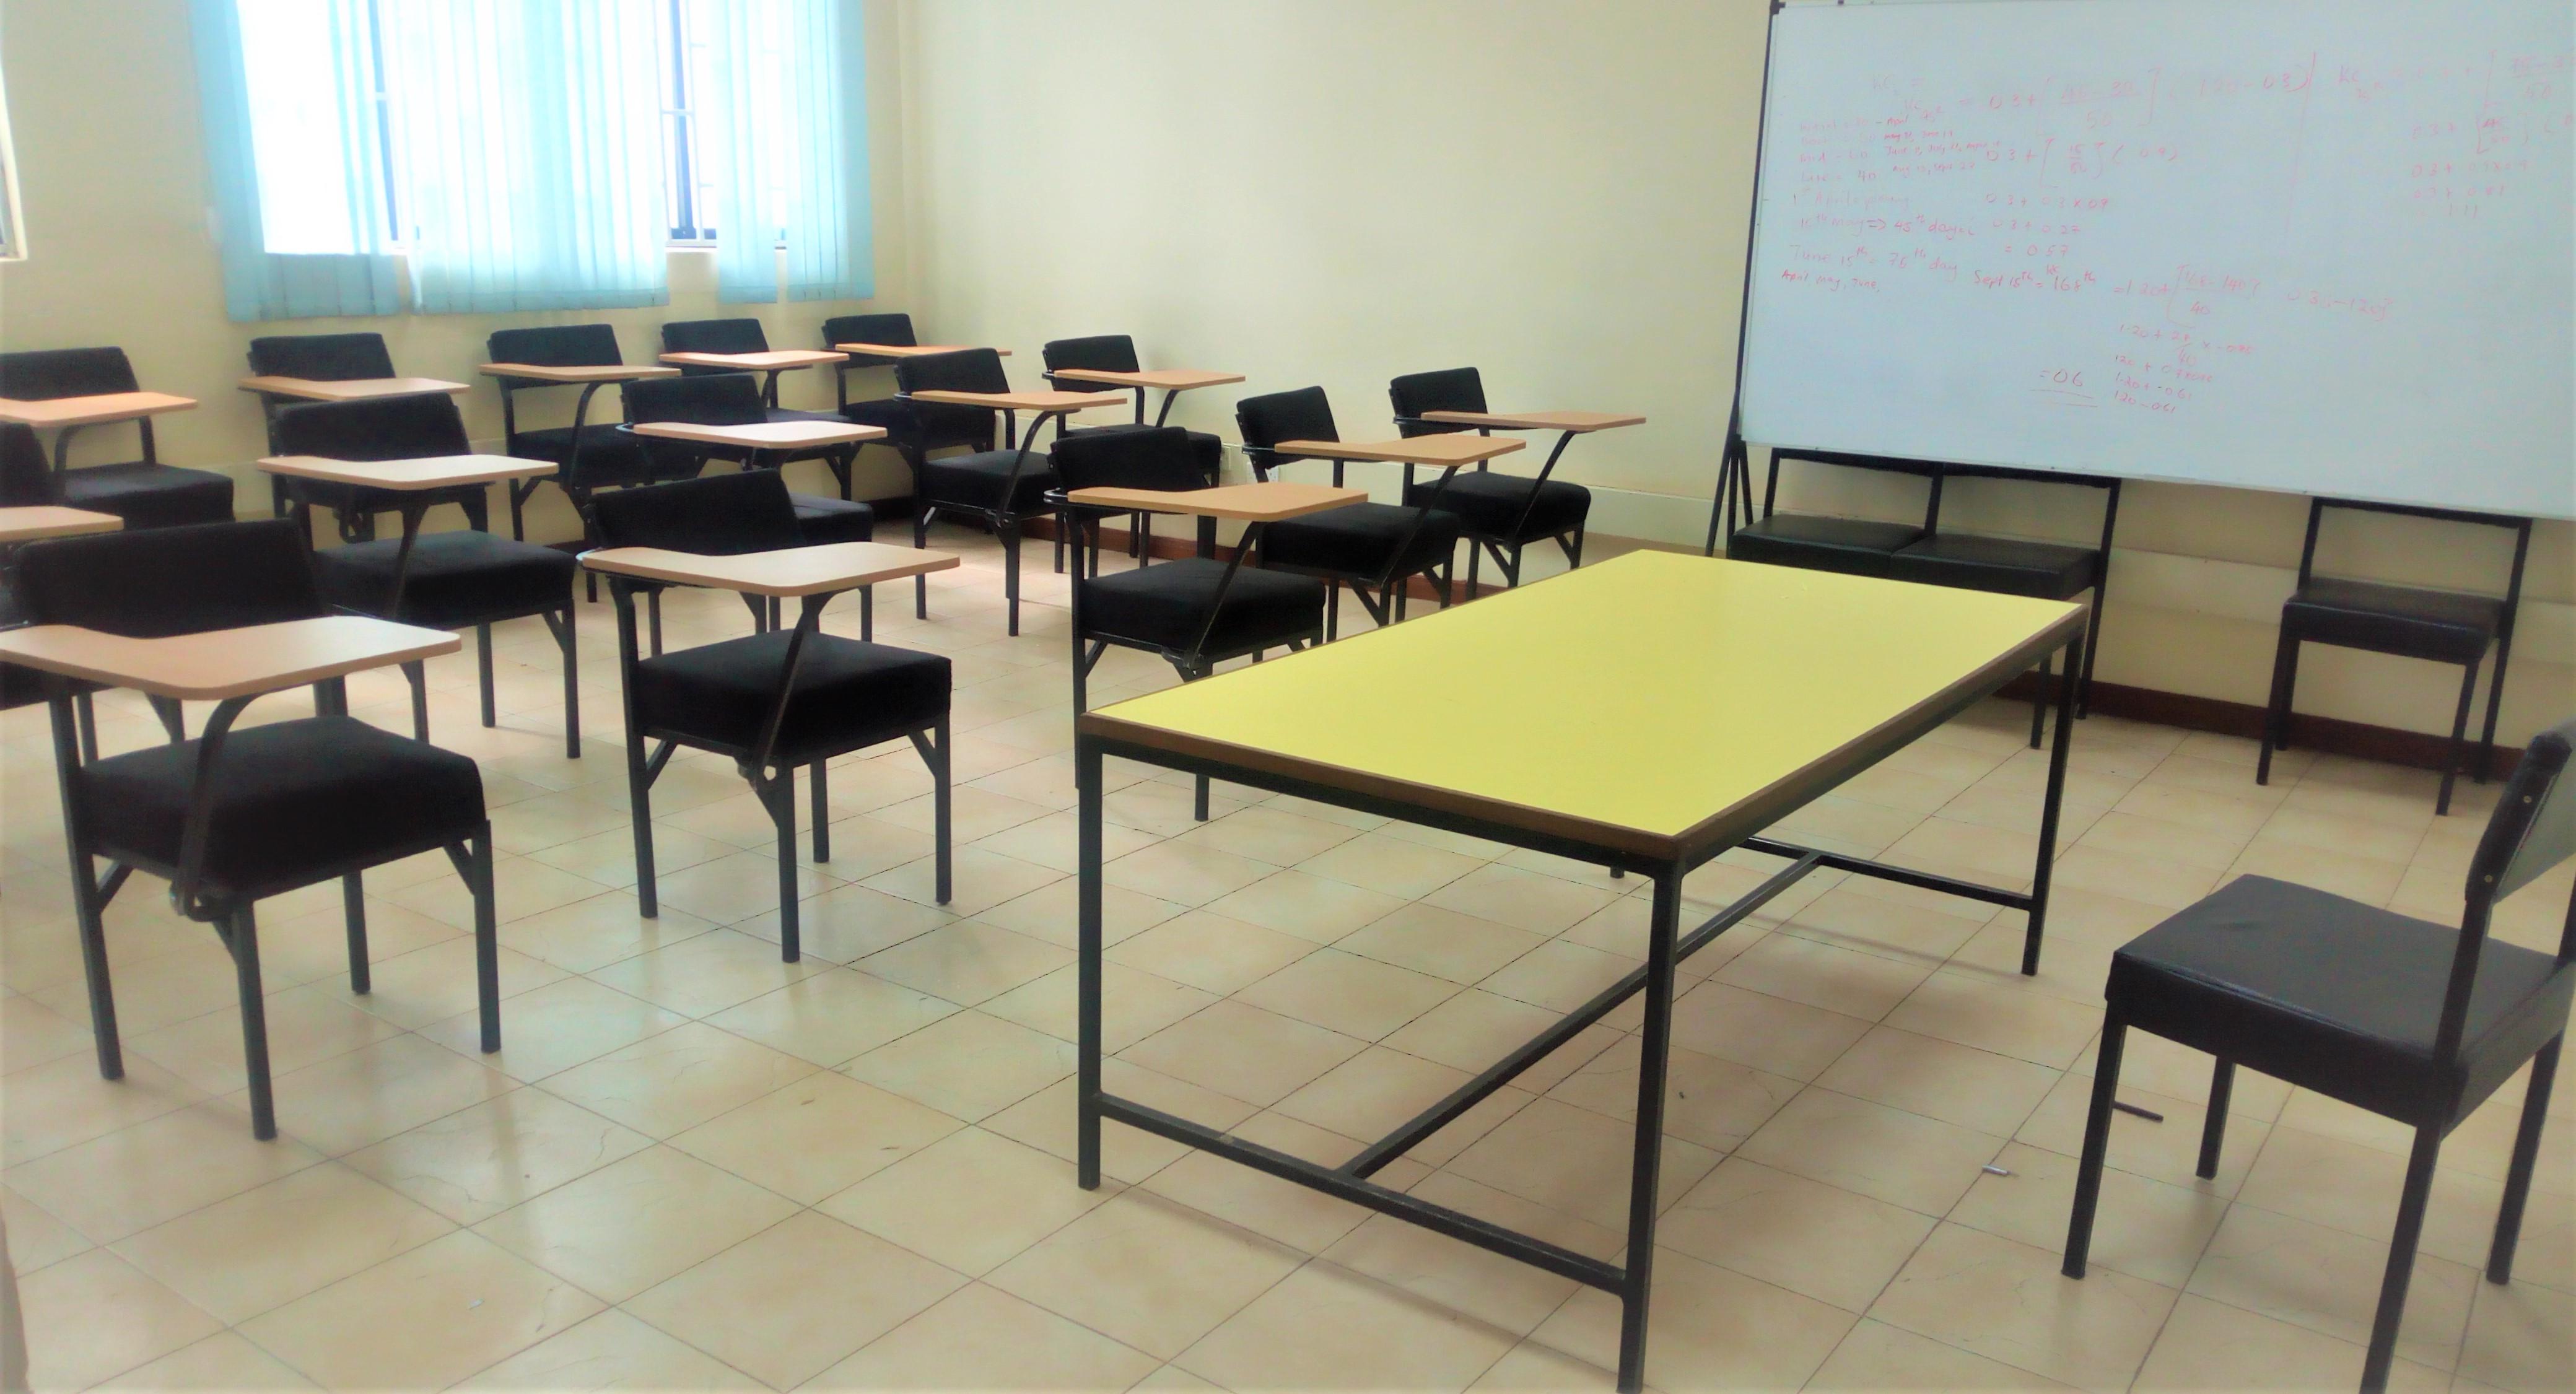 MCCA Lecture Room 101 Photo